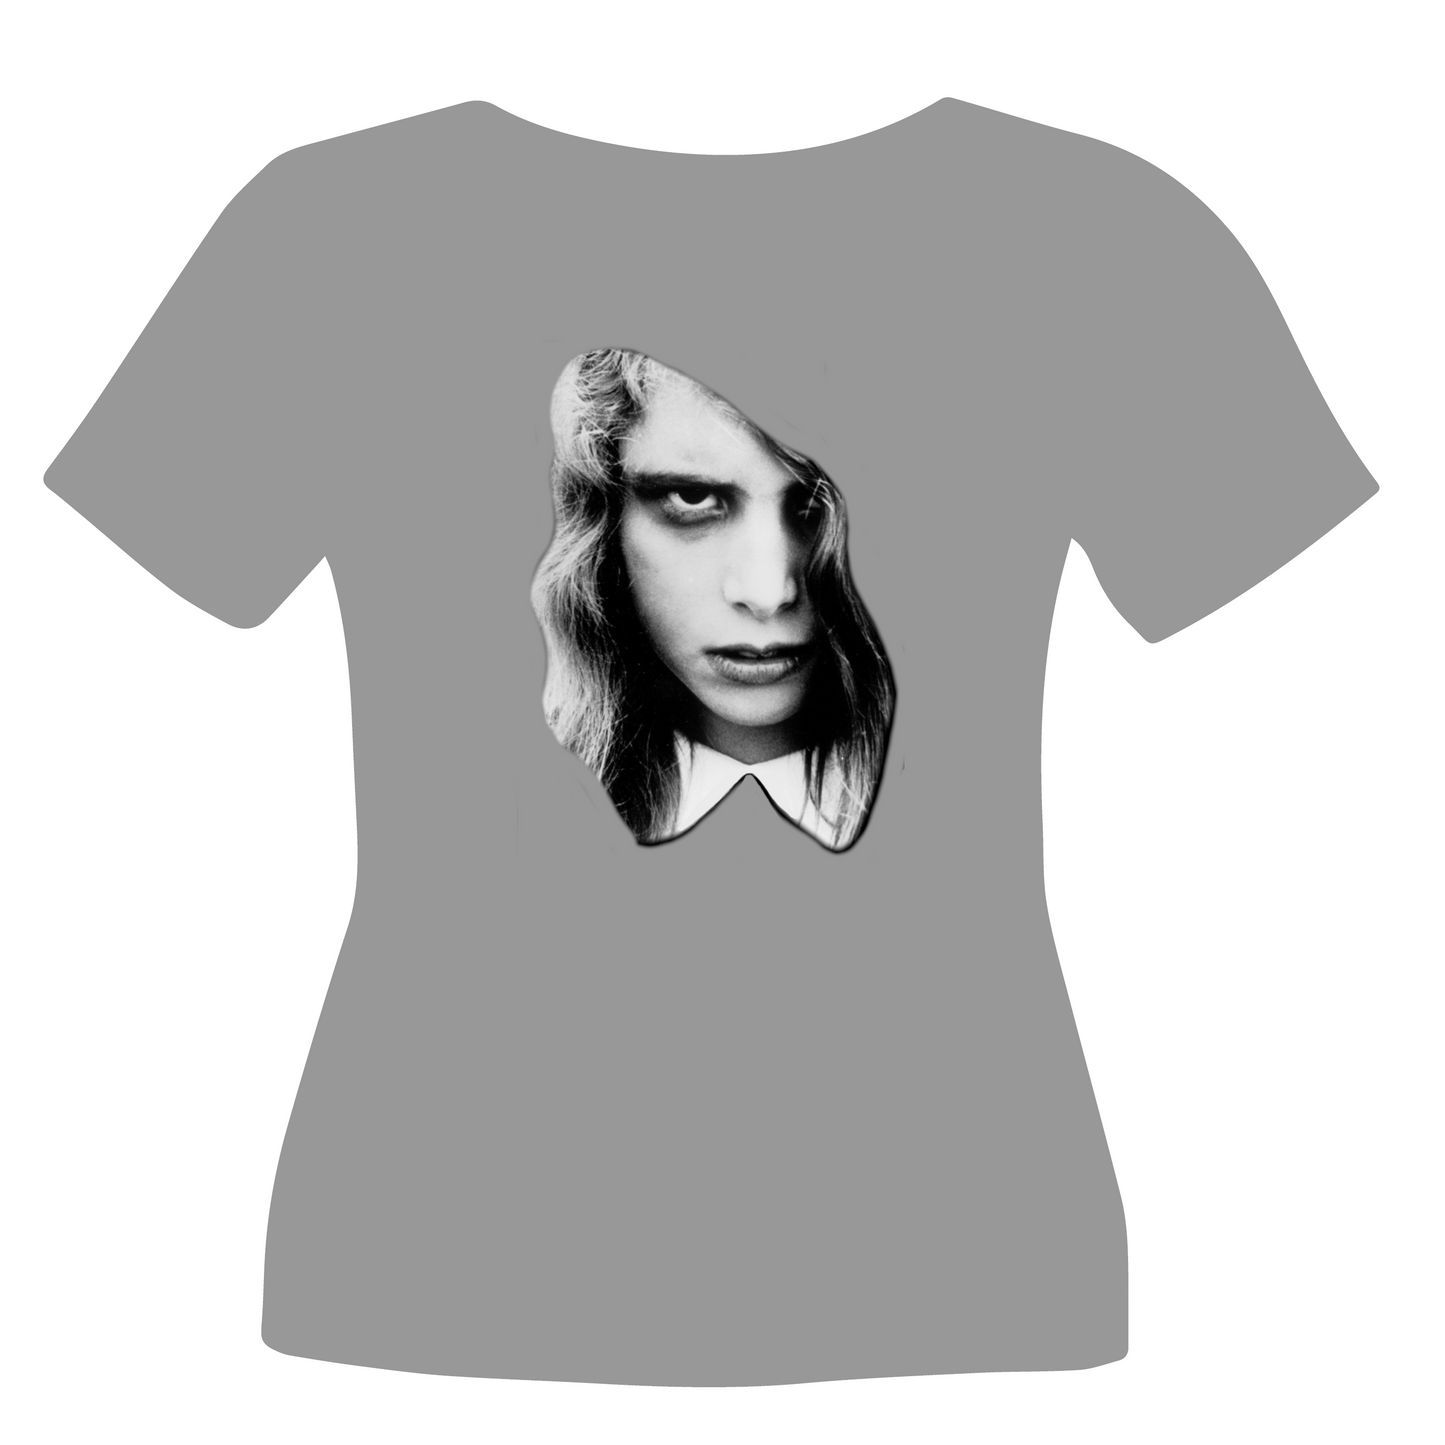 "Scary Zombie Girl" Graphic Tee Shirt (Horror)